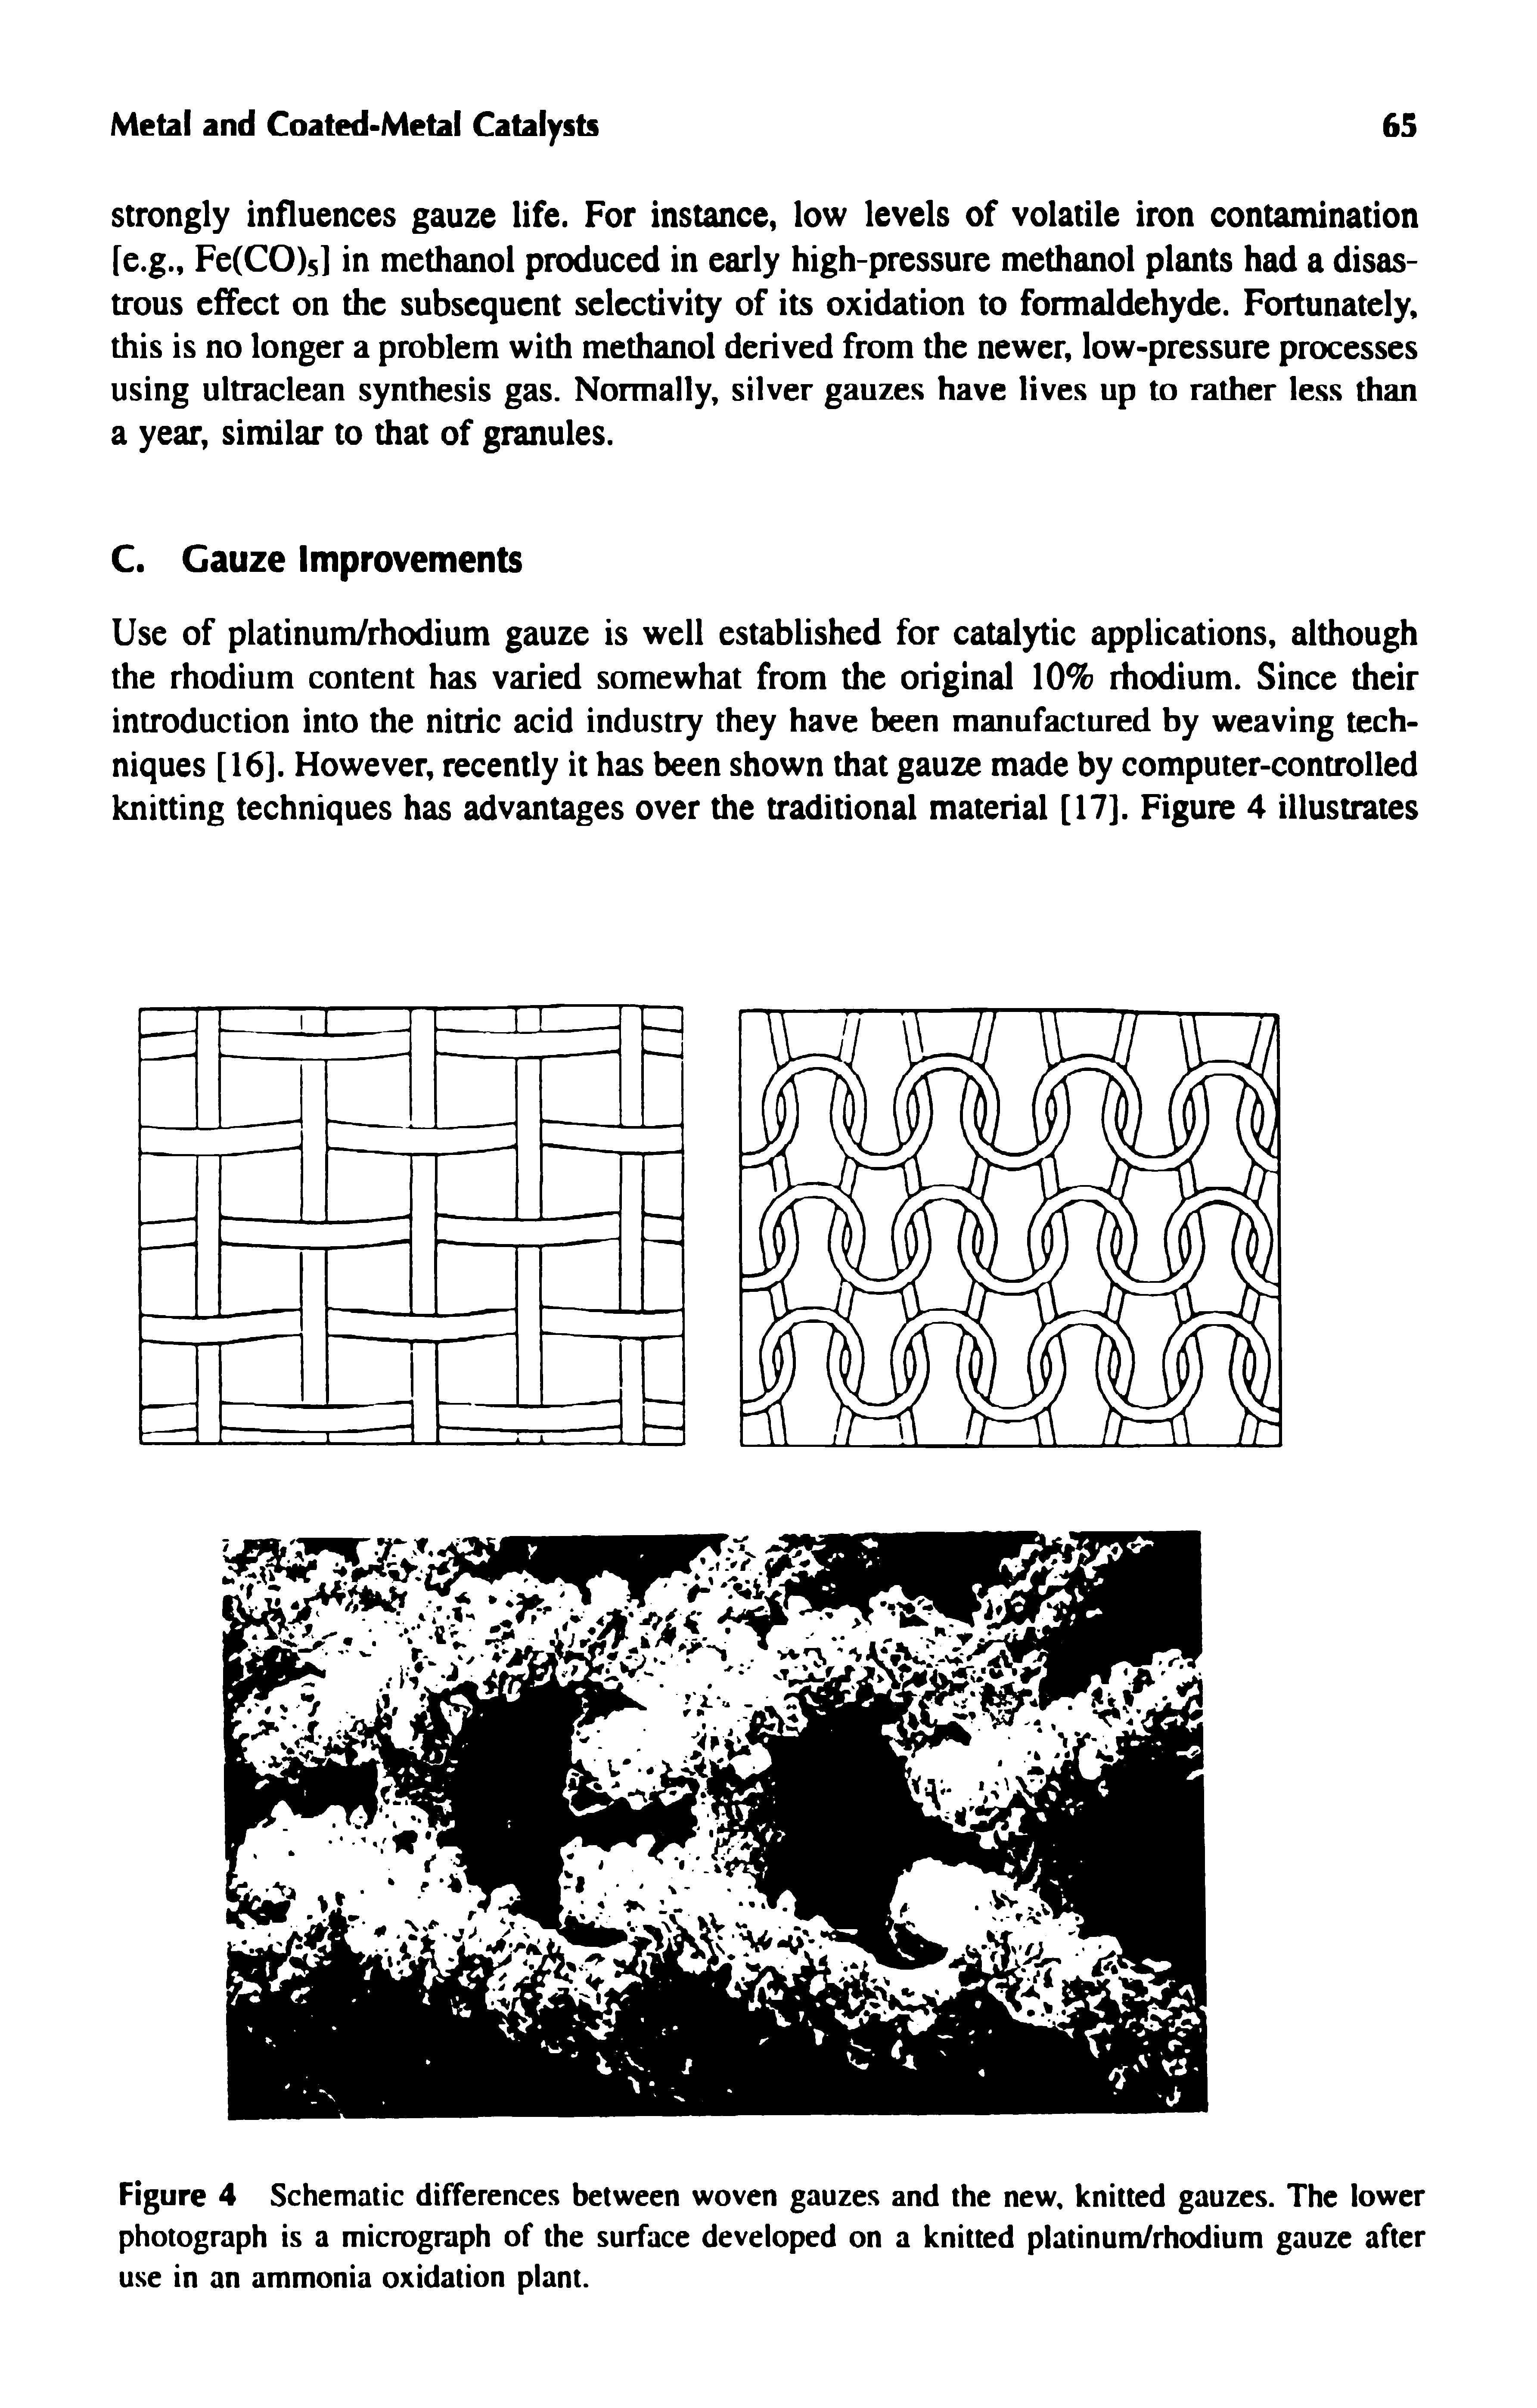 Figure 4 Schematic differences between woven gauzes and the new, knitted gauzes. The lower photograph is a micrograph of the surface developed on a knitted platinum/rhodium gauze after use in an ammonia oxidation plant.